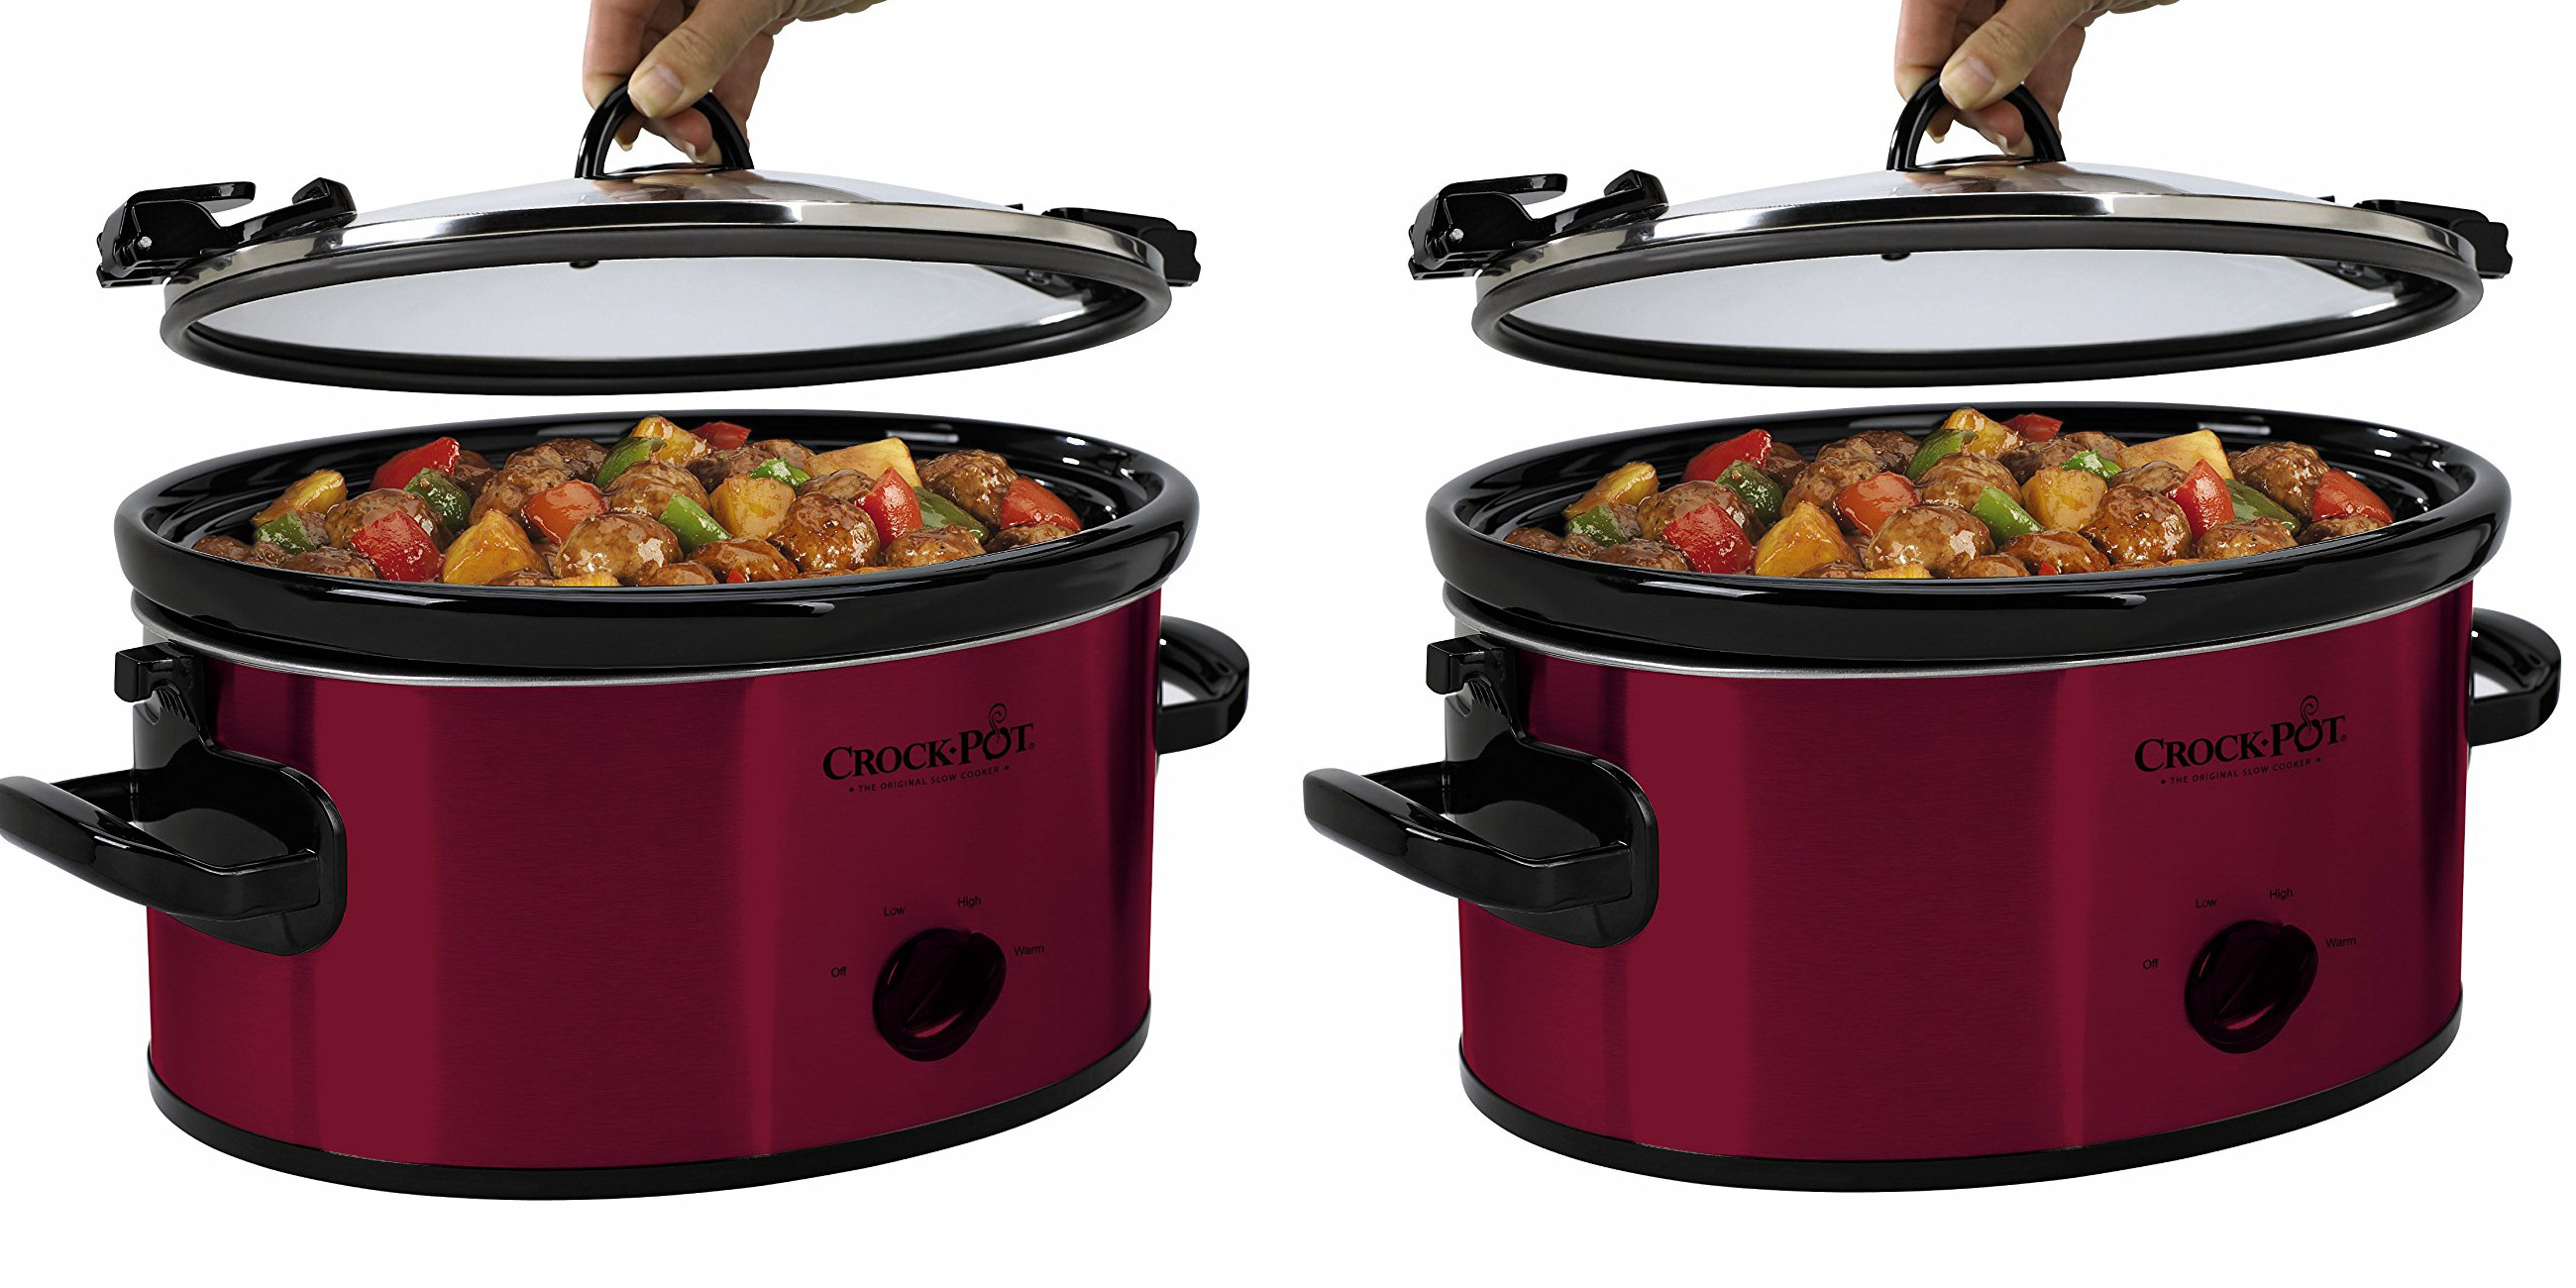 Crock-Pot's 6-Quart Portable Slow Cooker is down to $19 or less